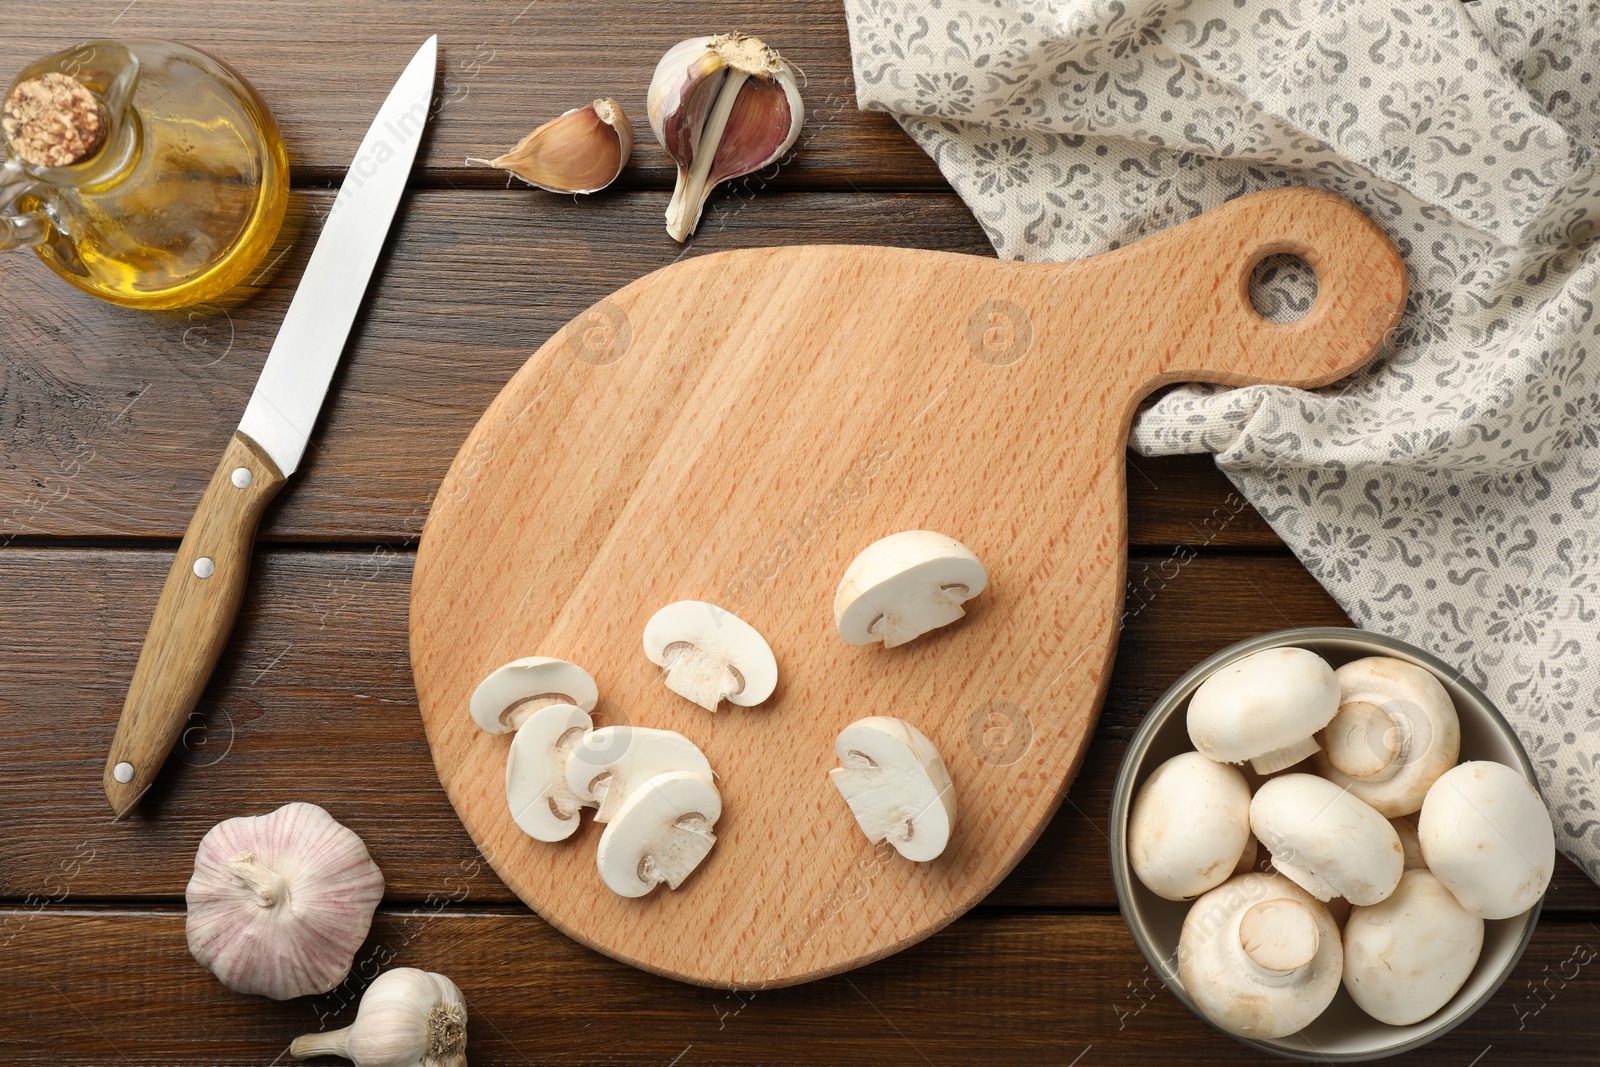 Photo of Cutting board with mushrooms and knife on wooden table, flat lay